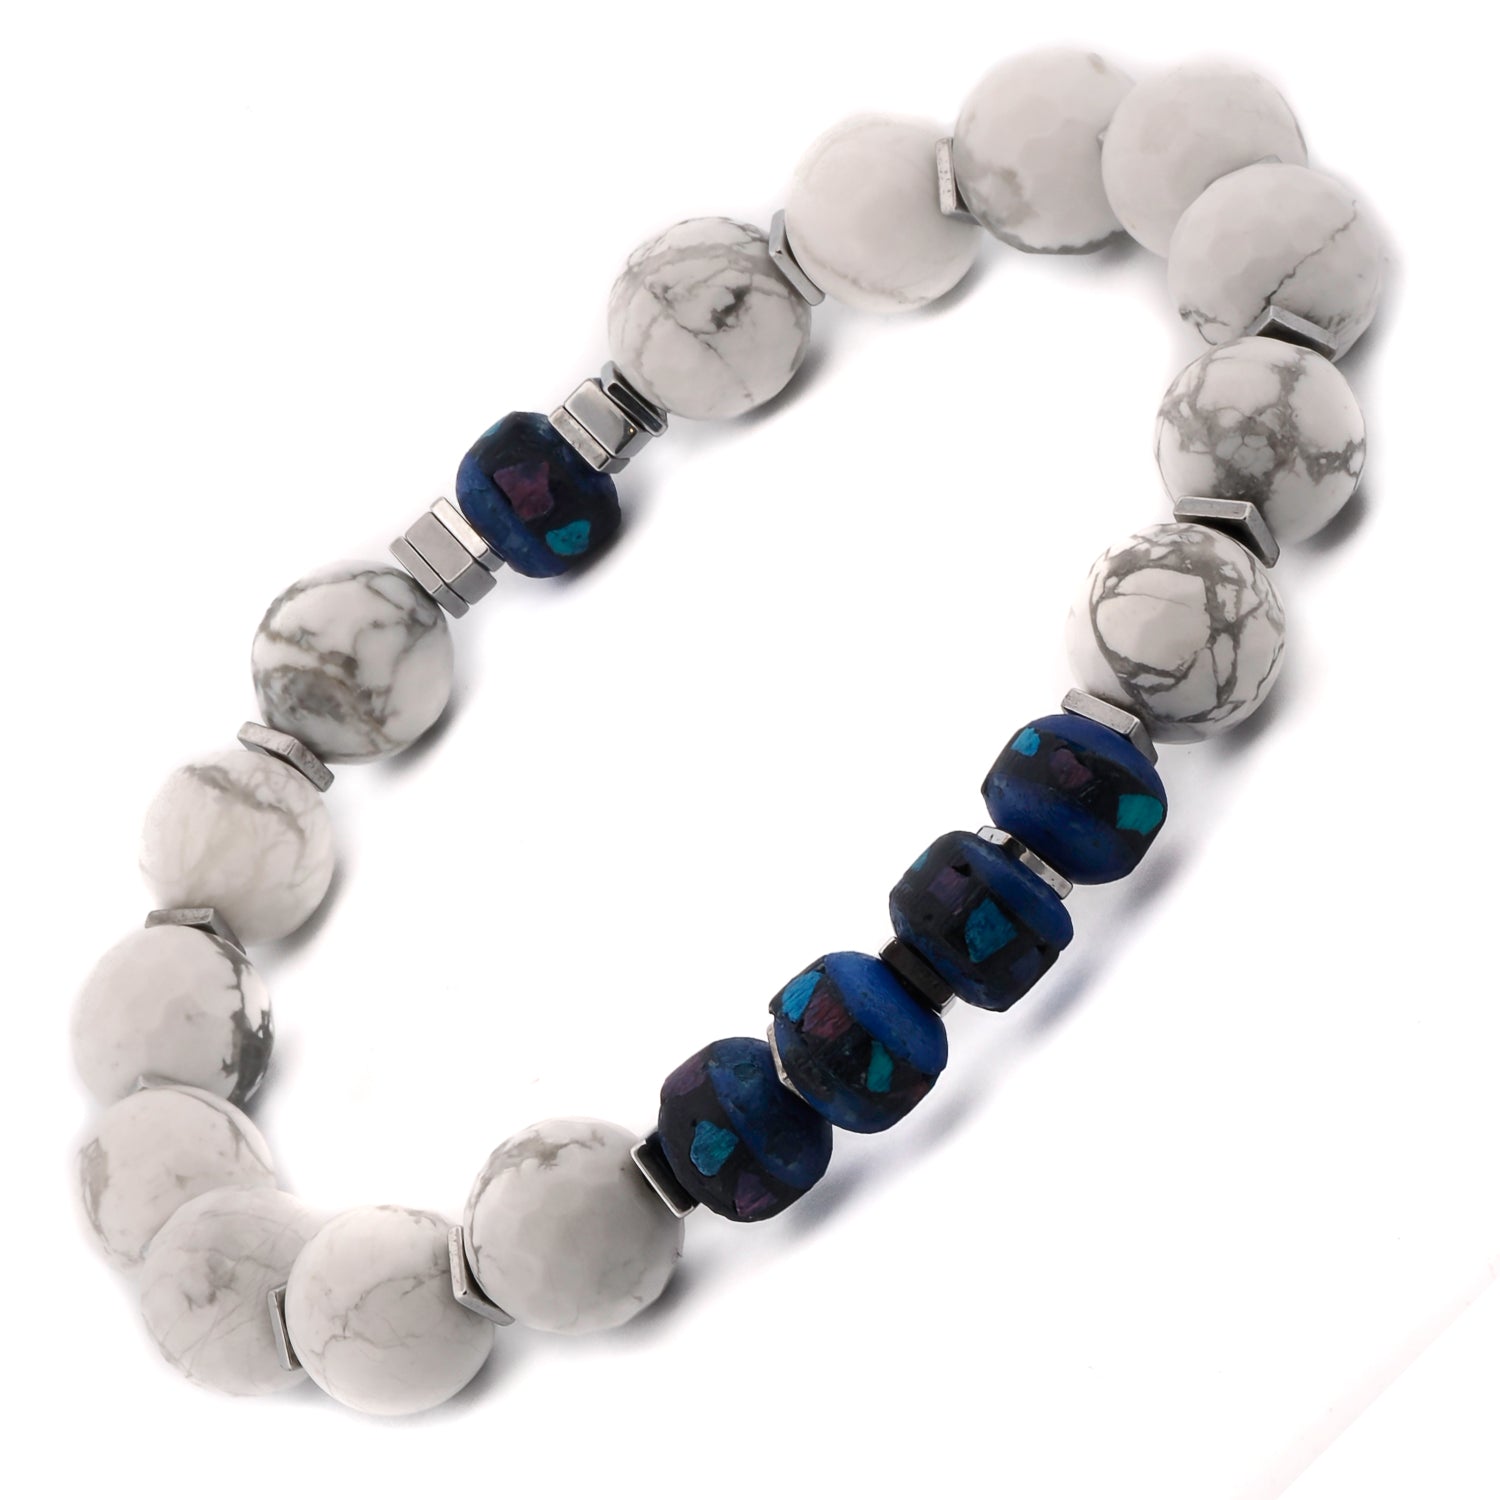 Positive Energy White Howlite and Blue Nepal Beaded Bracelet, handcrafted for a unique and uplifting men's accessory